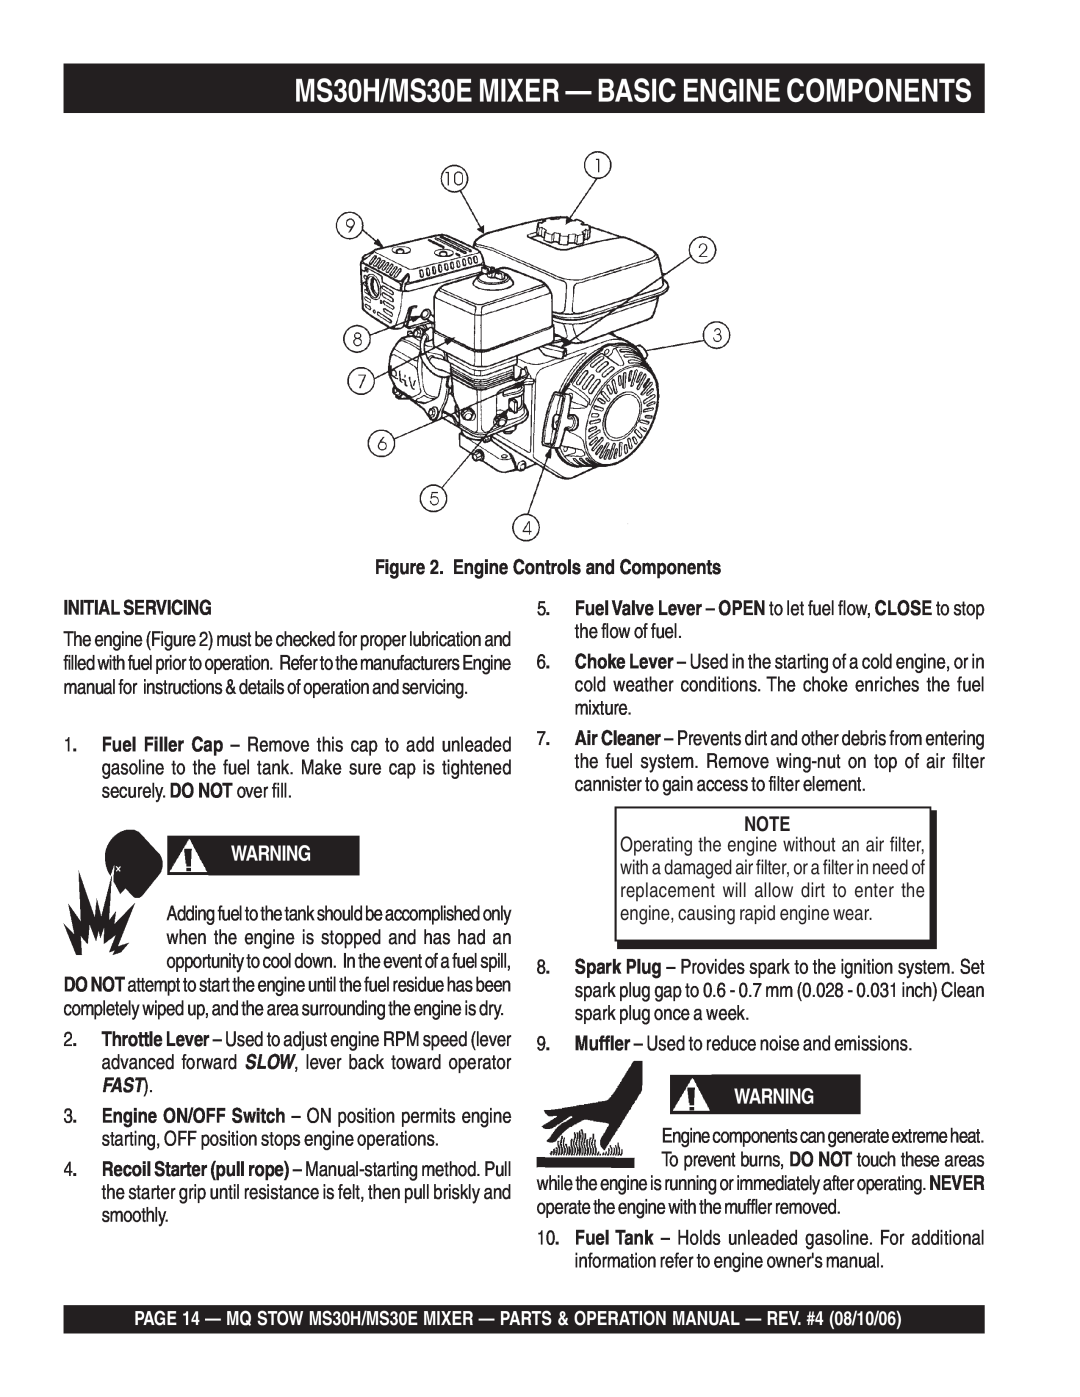 Sonic Alert manual MS30H/MS30E MIXER - BASIC ENGINE COMPONENTS, Engine Controls and Components 